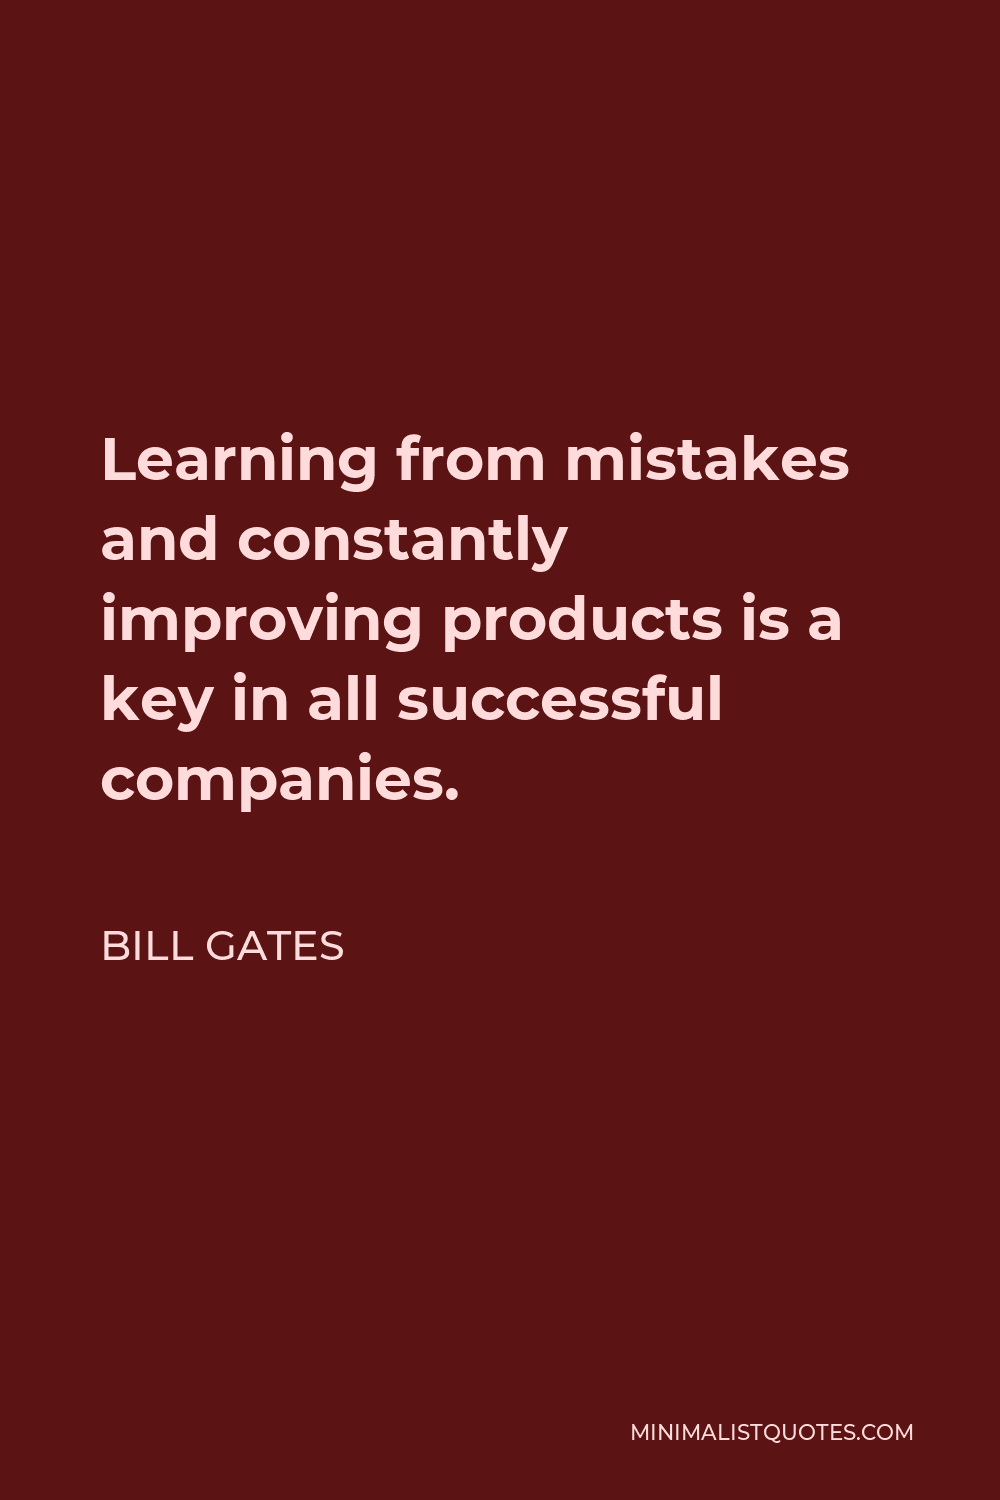 Bill Gates Quote - Learning from mistakes and constantly improving products is a key in all successful companies.